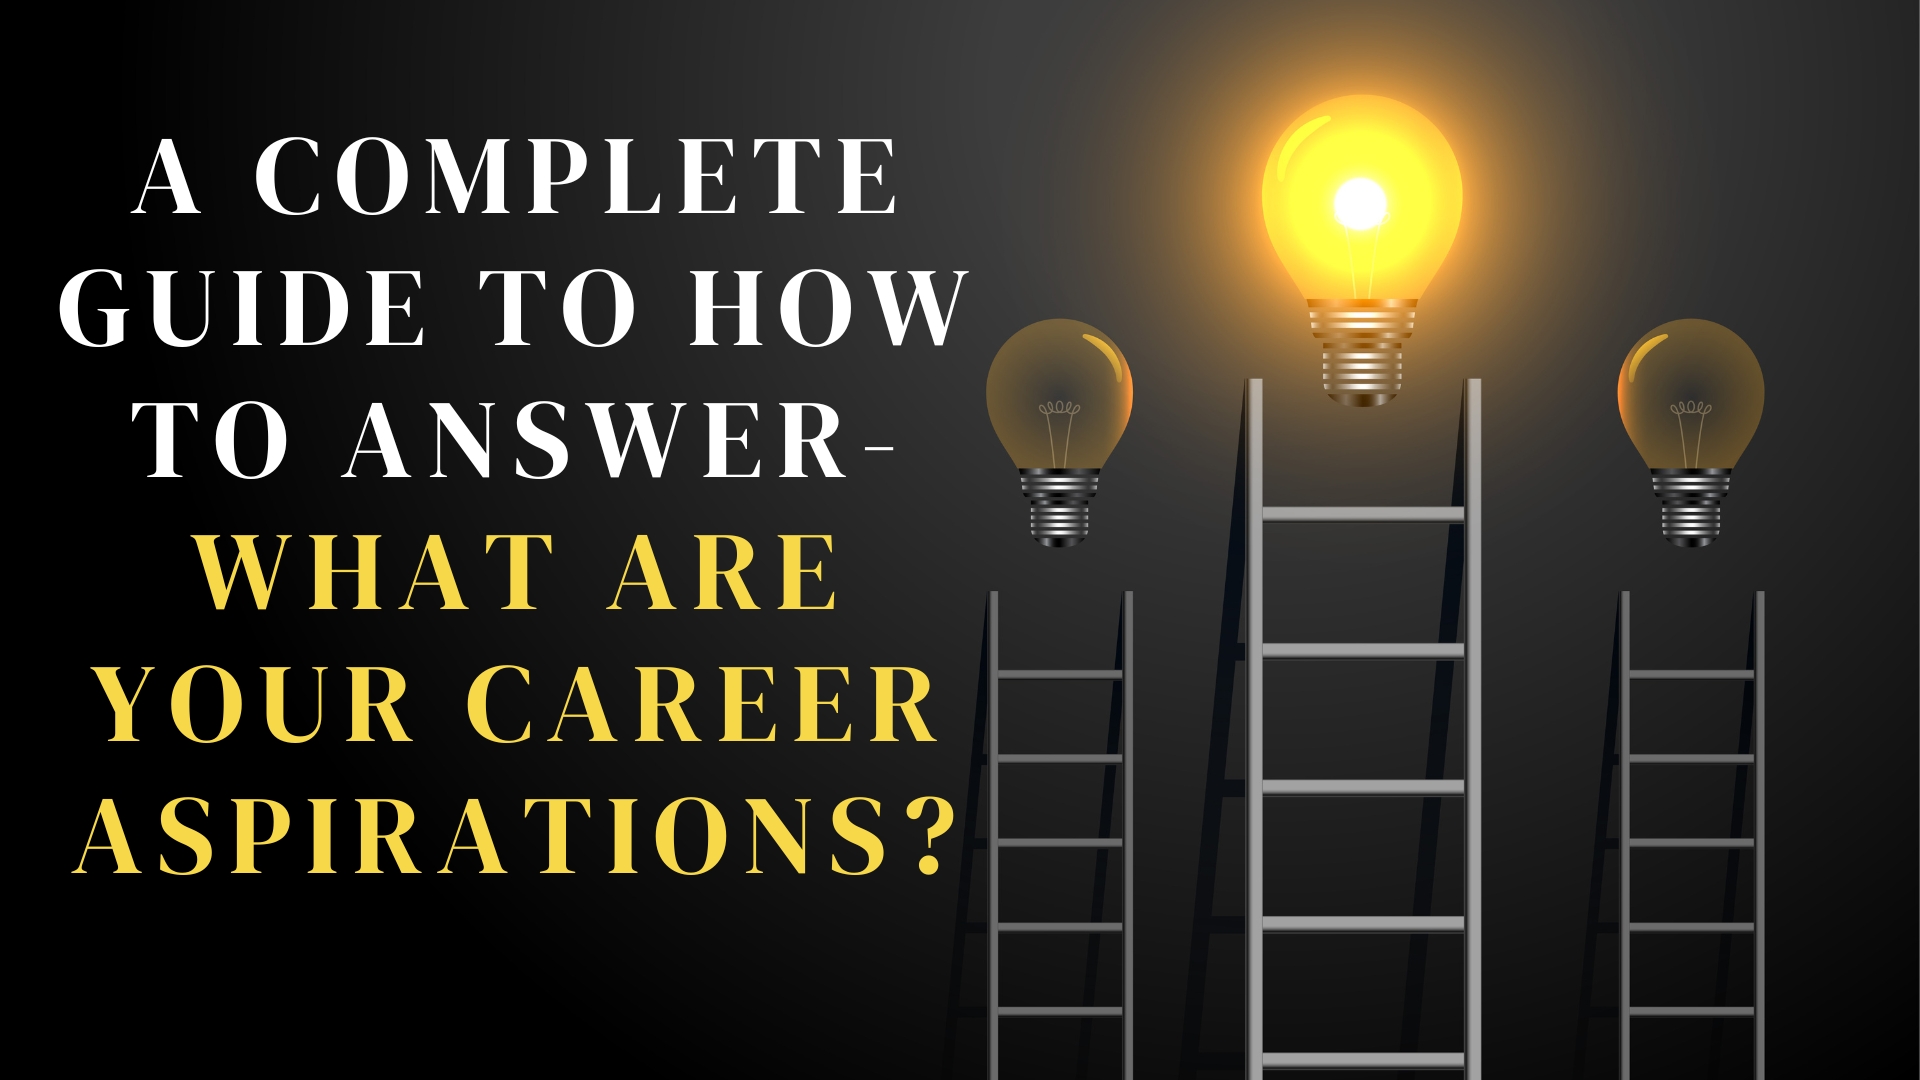 A Complete Guide To How To Answer- What Are Your Career Aspirations?